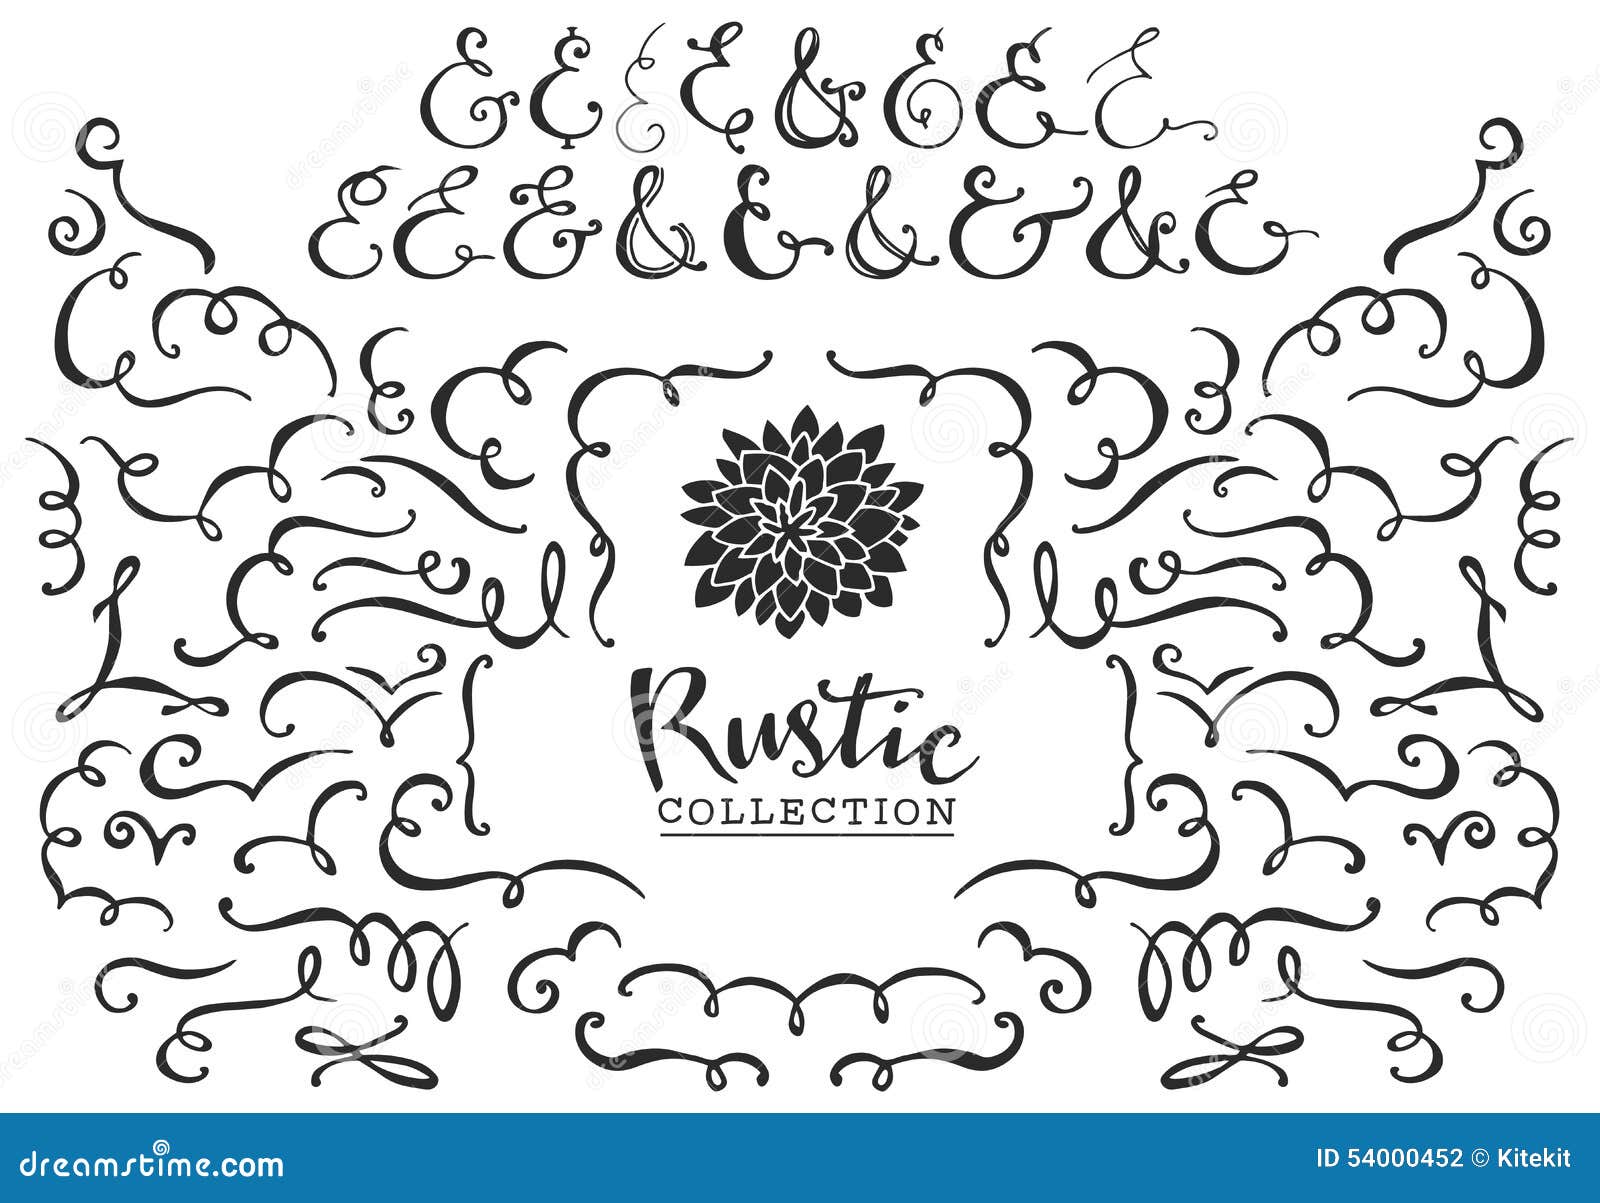 rustic decorative curls, swirls and ampersands collection.